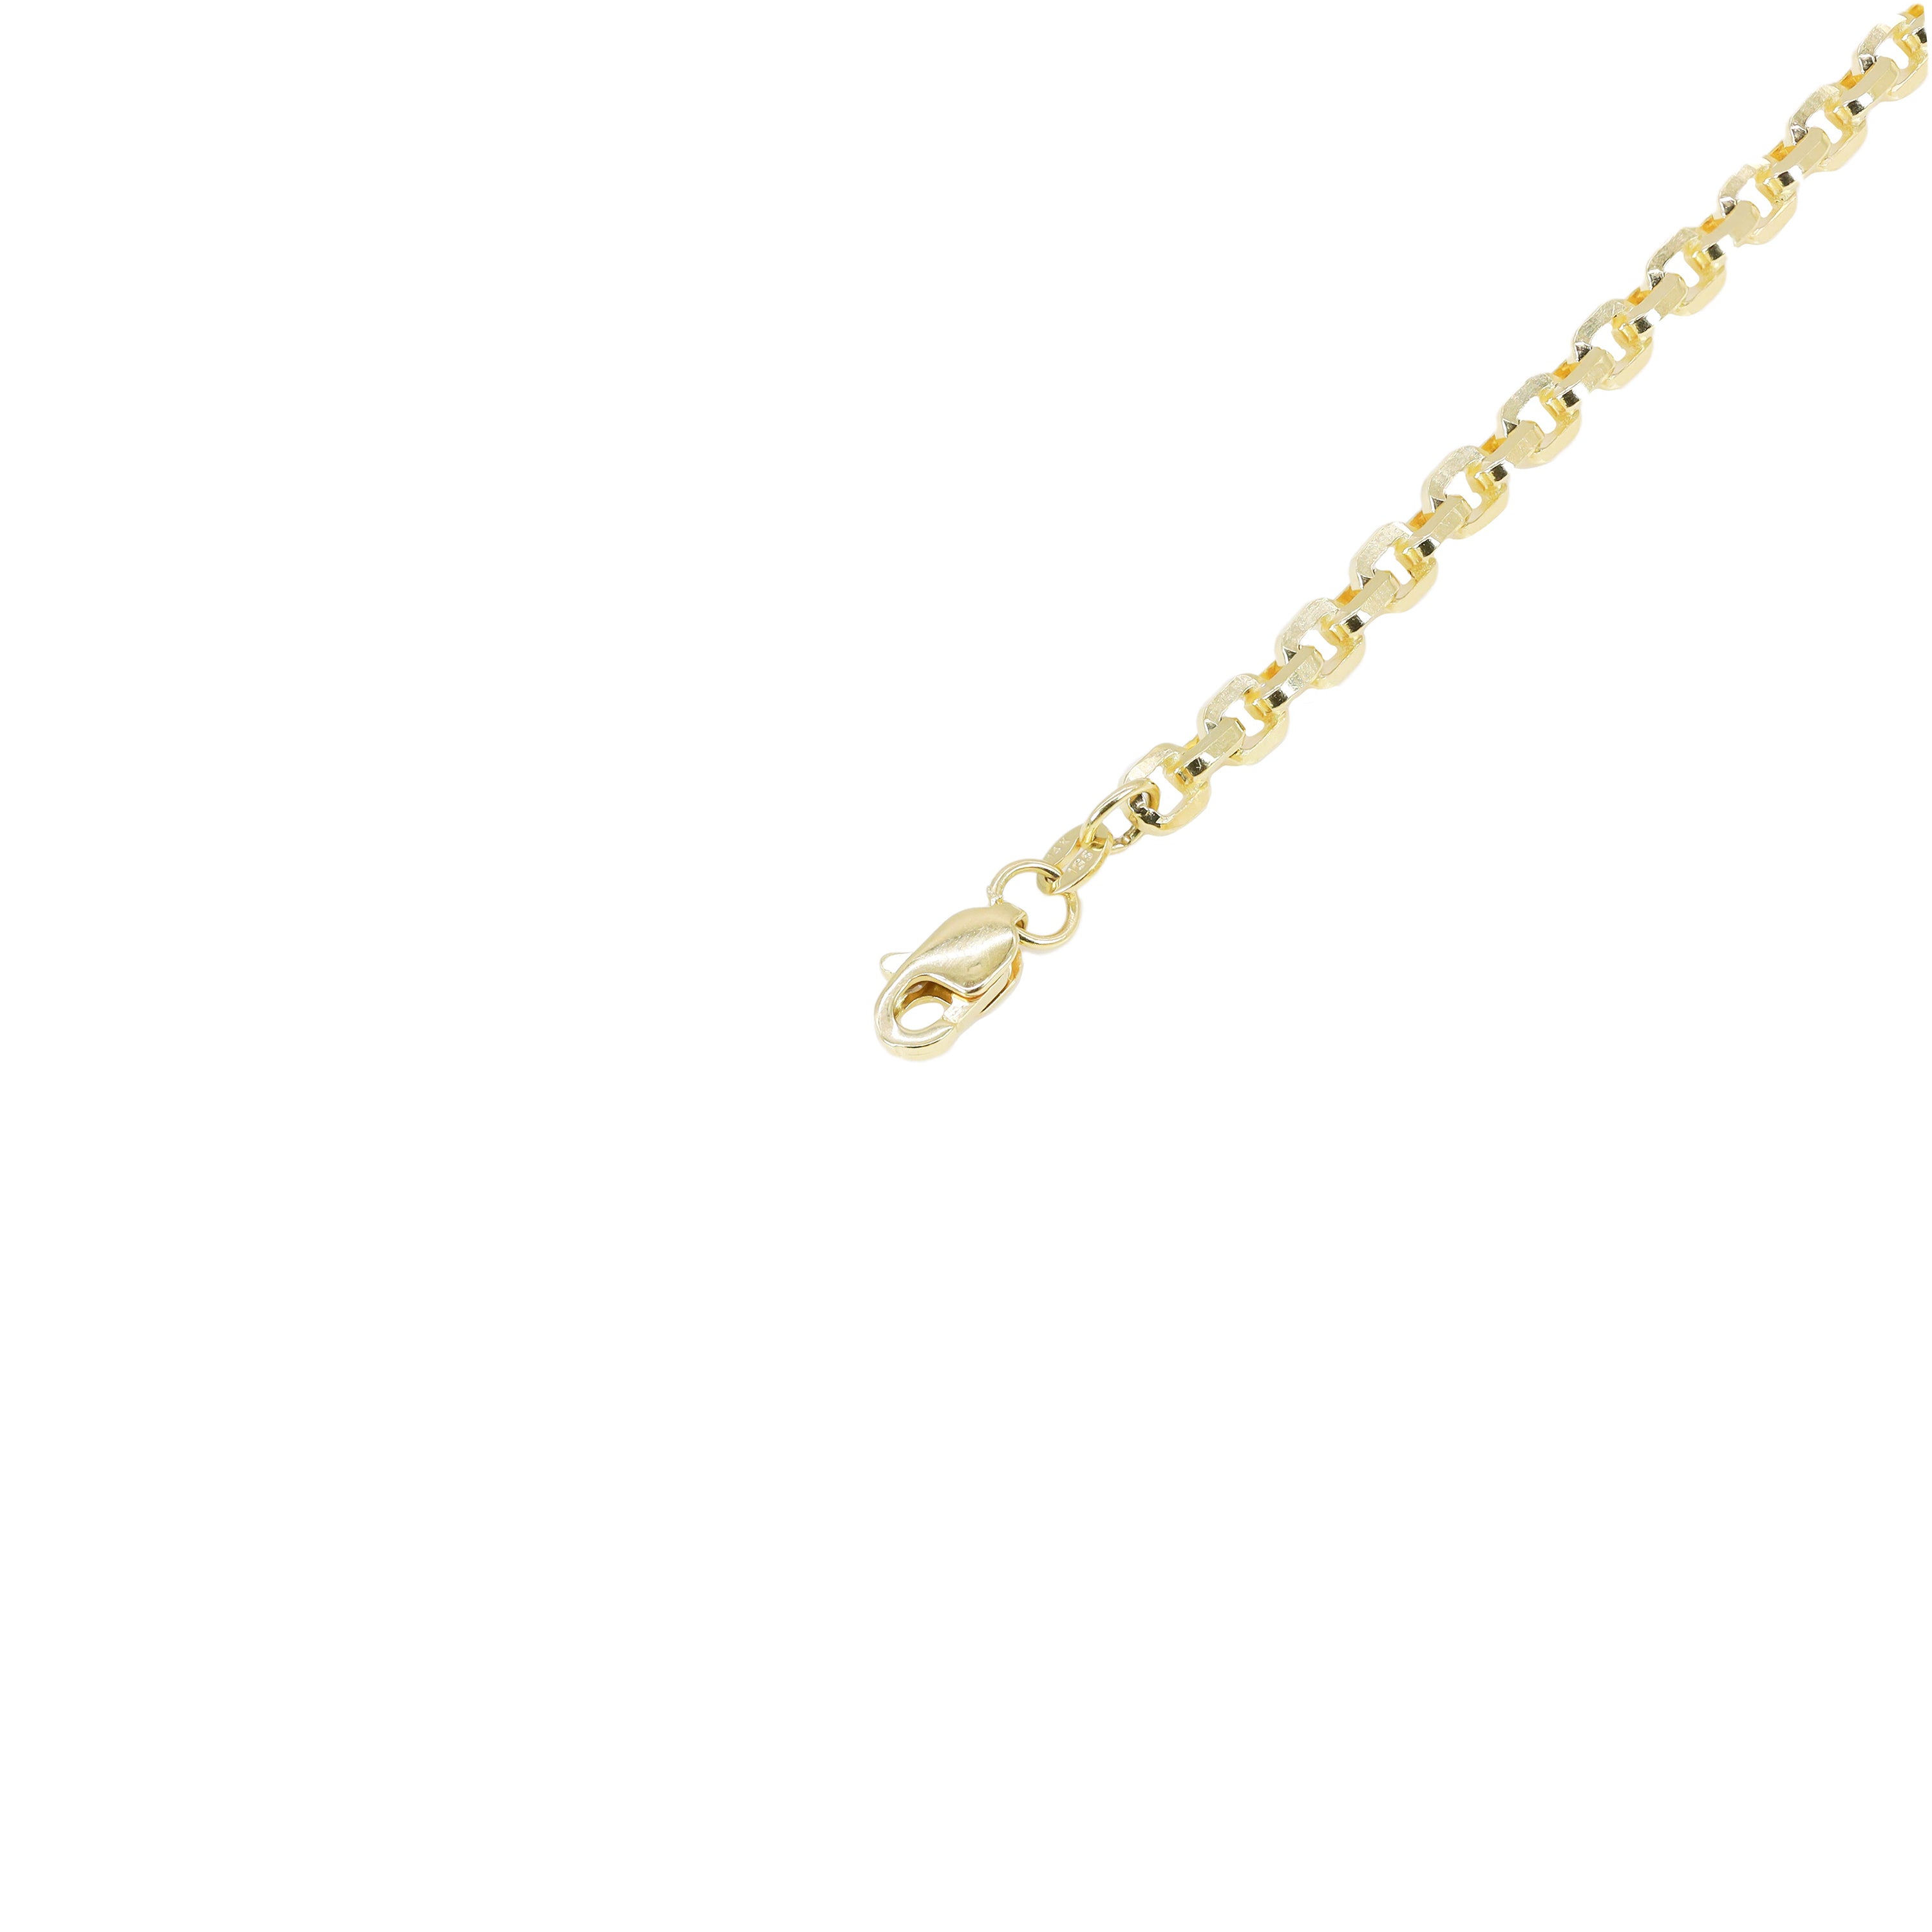 10KT Solid Hermes Link Yellow Gold Chain